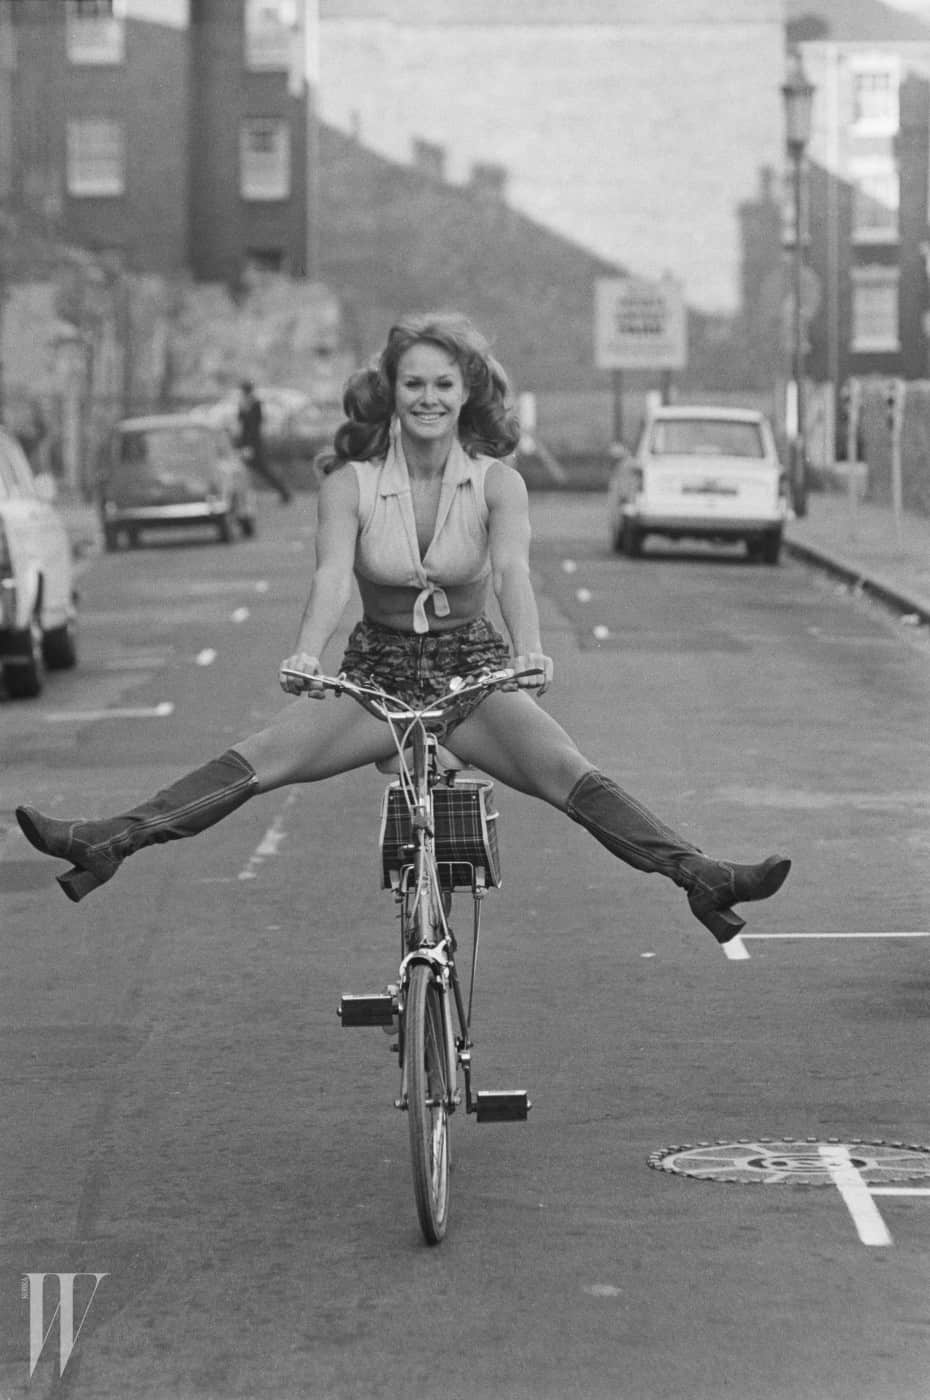 British actress and comedian Carol Cleveland riding a bike, UK, 24th October 1971. (Photo by D. Morrison/Express/Hulton Archive/Getty Images)